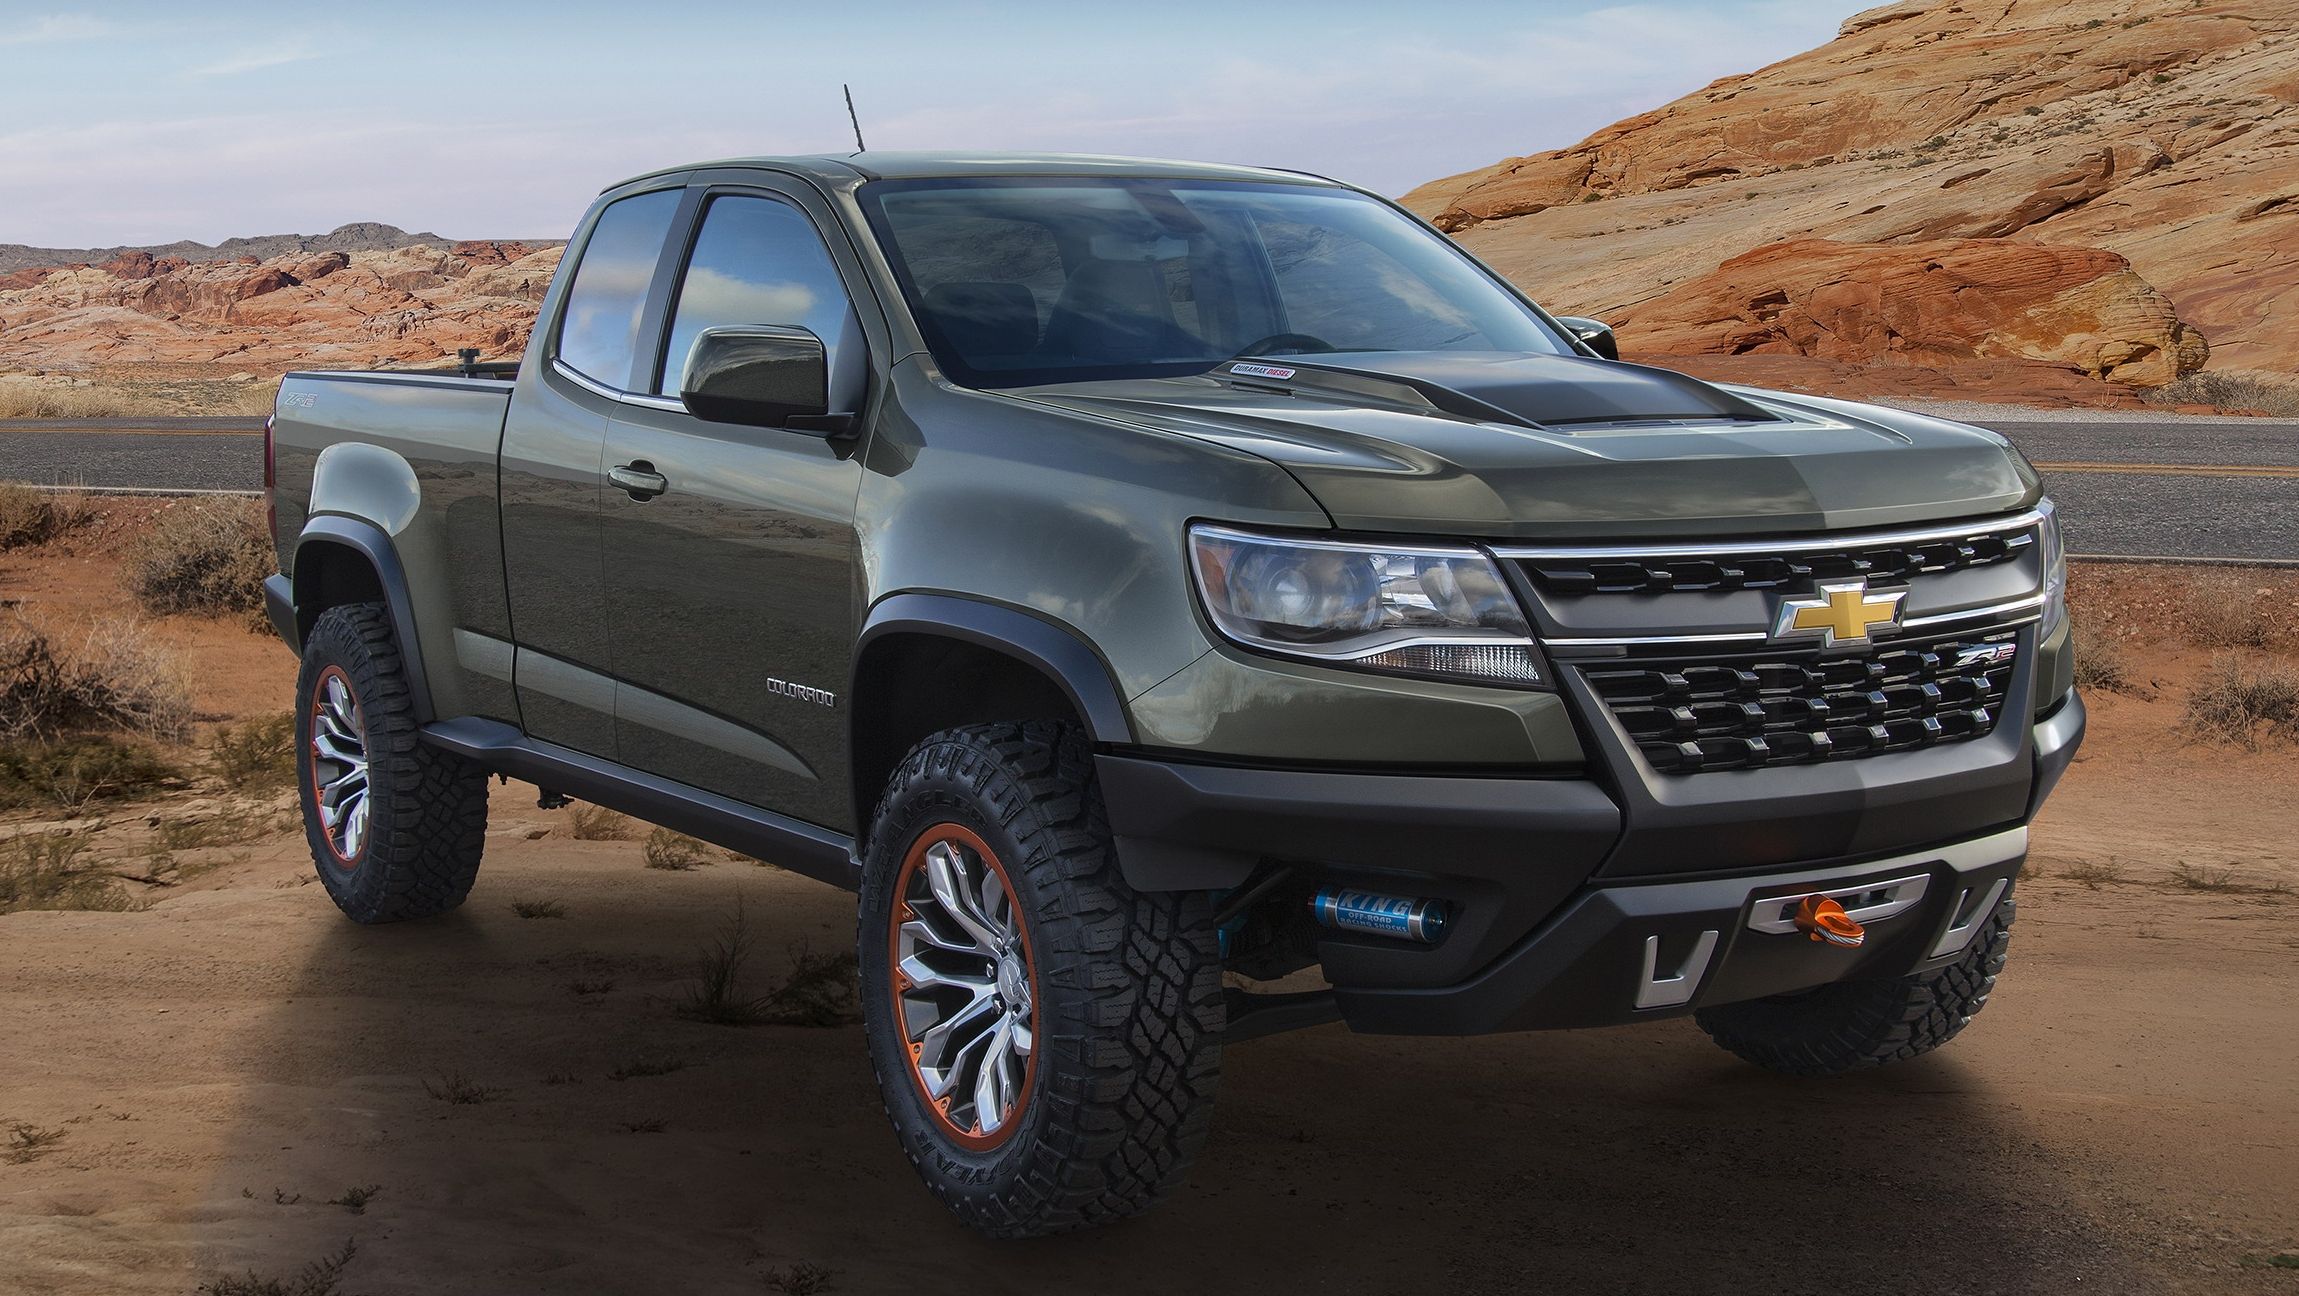 Finally, we get a god look at the 2.8-liter Duramax diesel ngine in the Colorado, albeit in an of-road concept. 